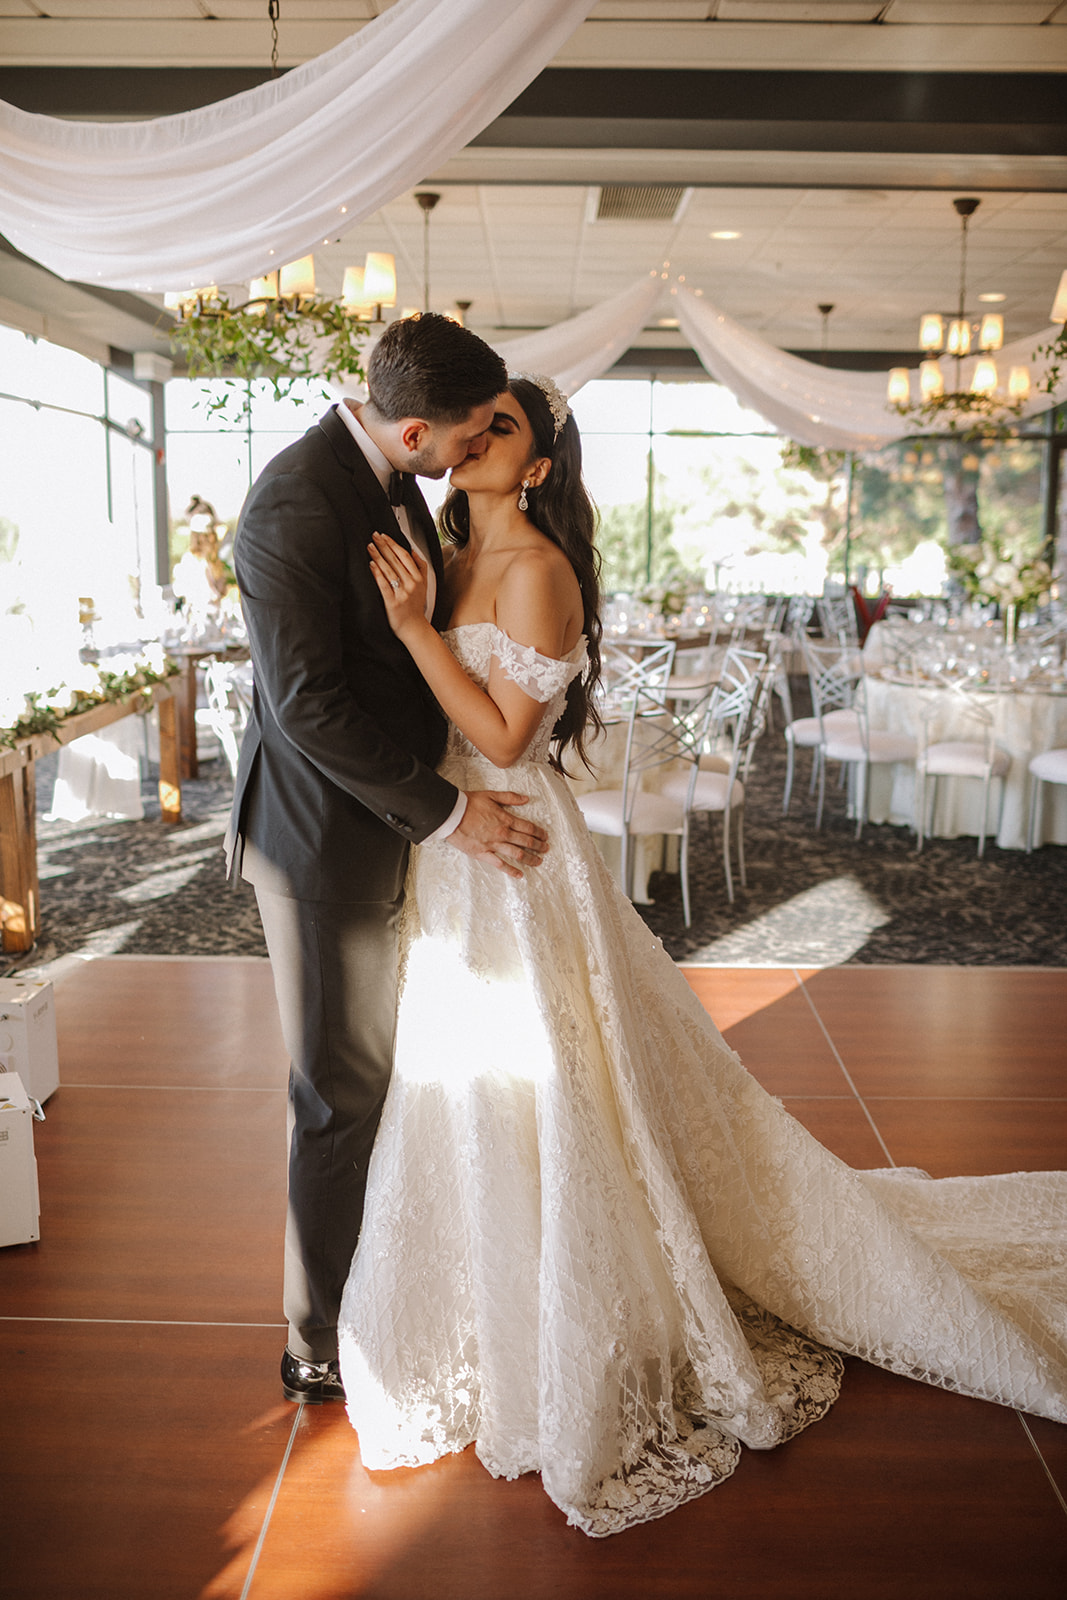 Newlywed Kissing on Dance floor during Room Reveal for Fairytale Revere Country Club Wedding